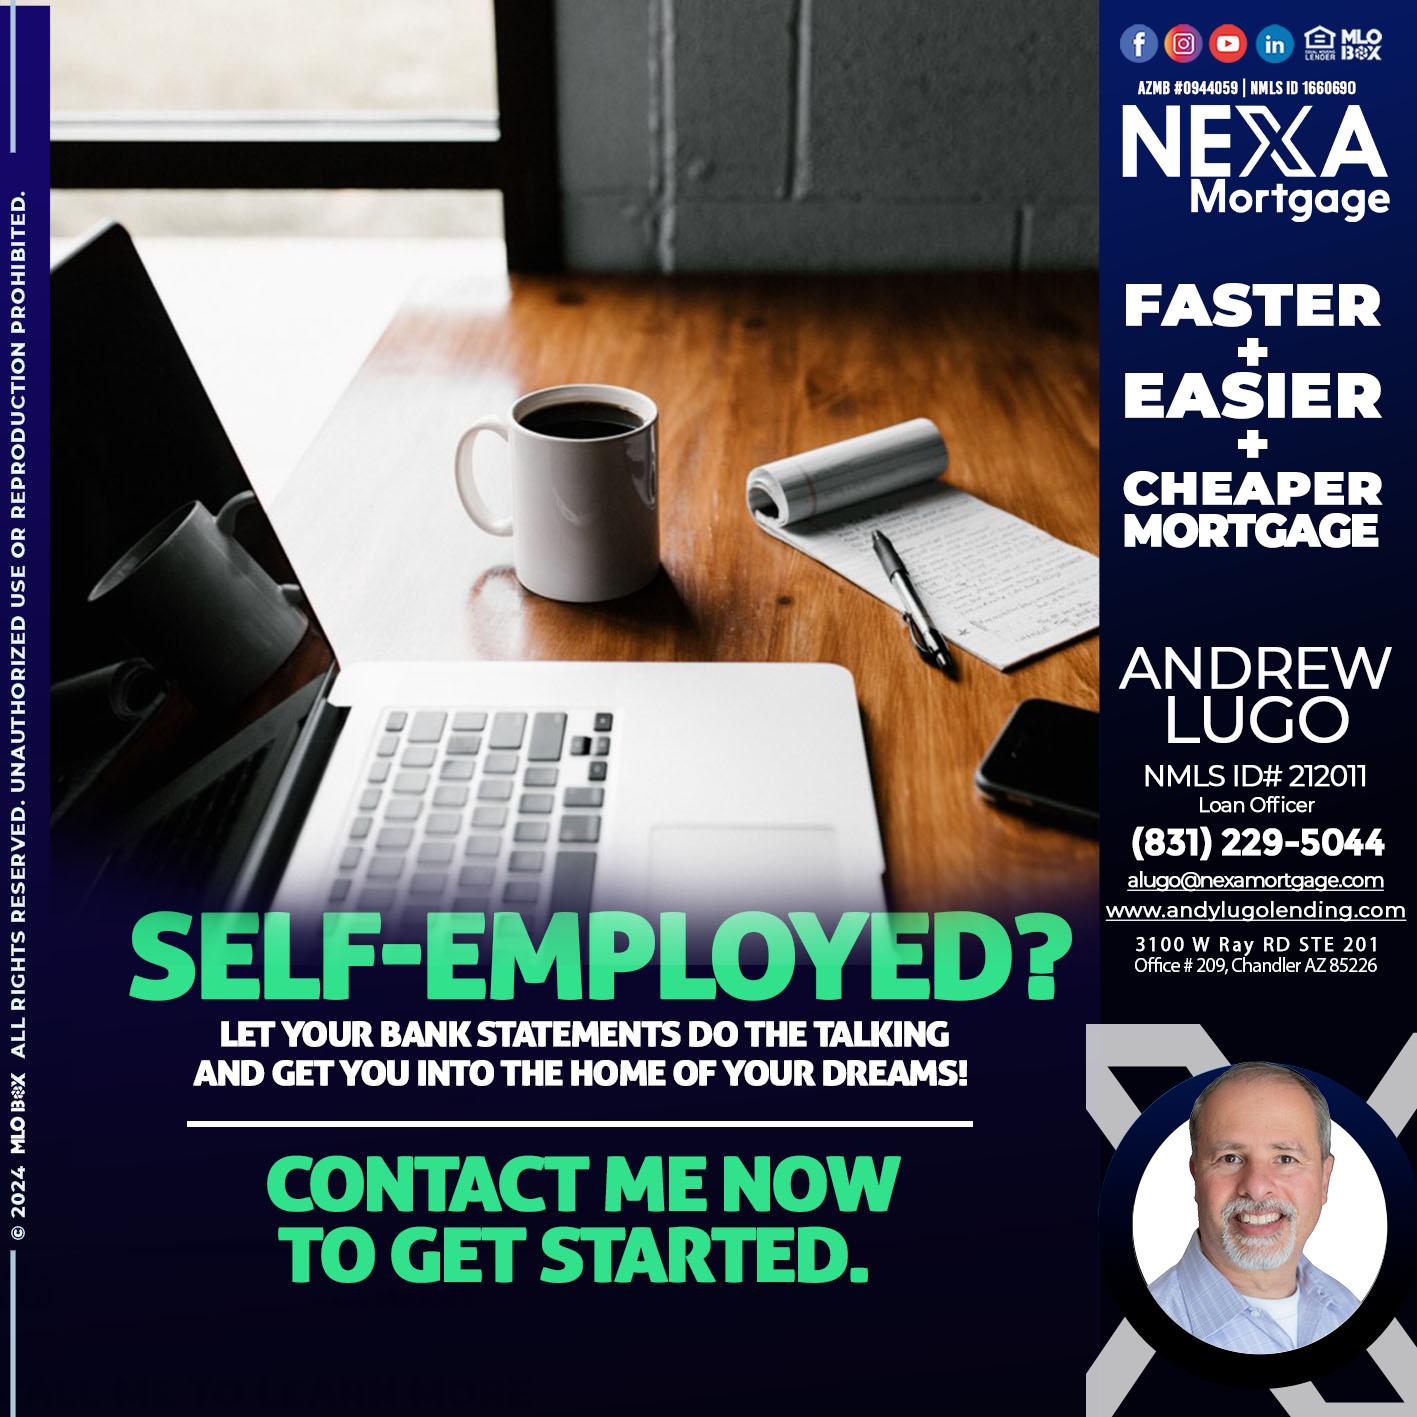 SELF EMPLOYED - Andrew Lugo -Loan Officer